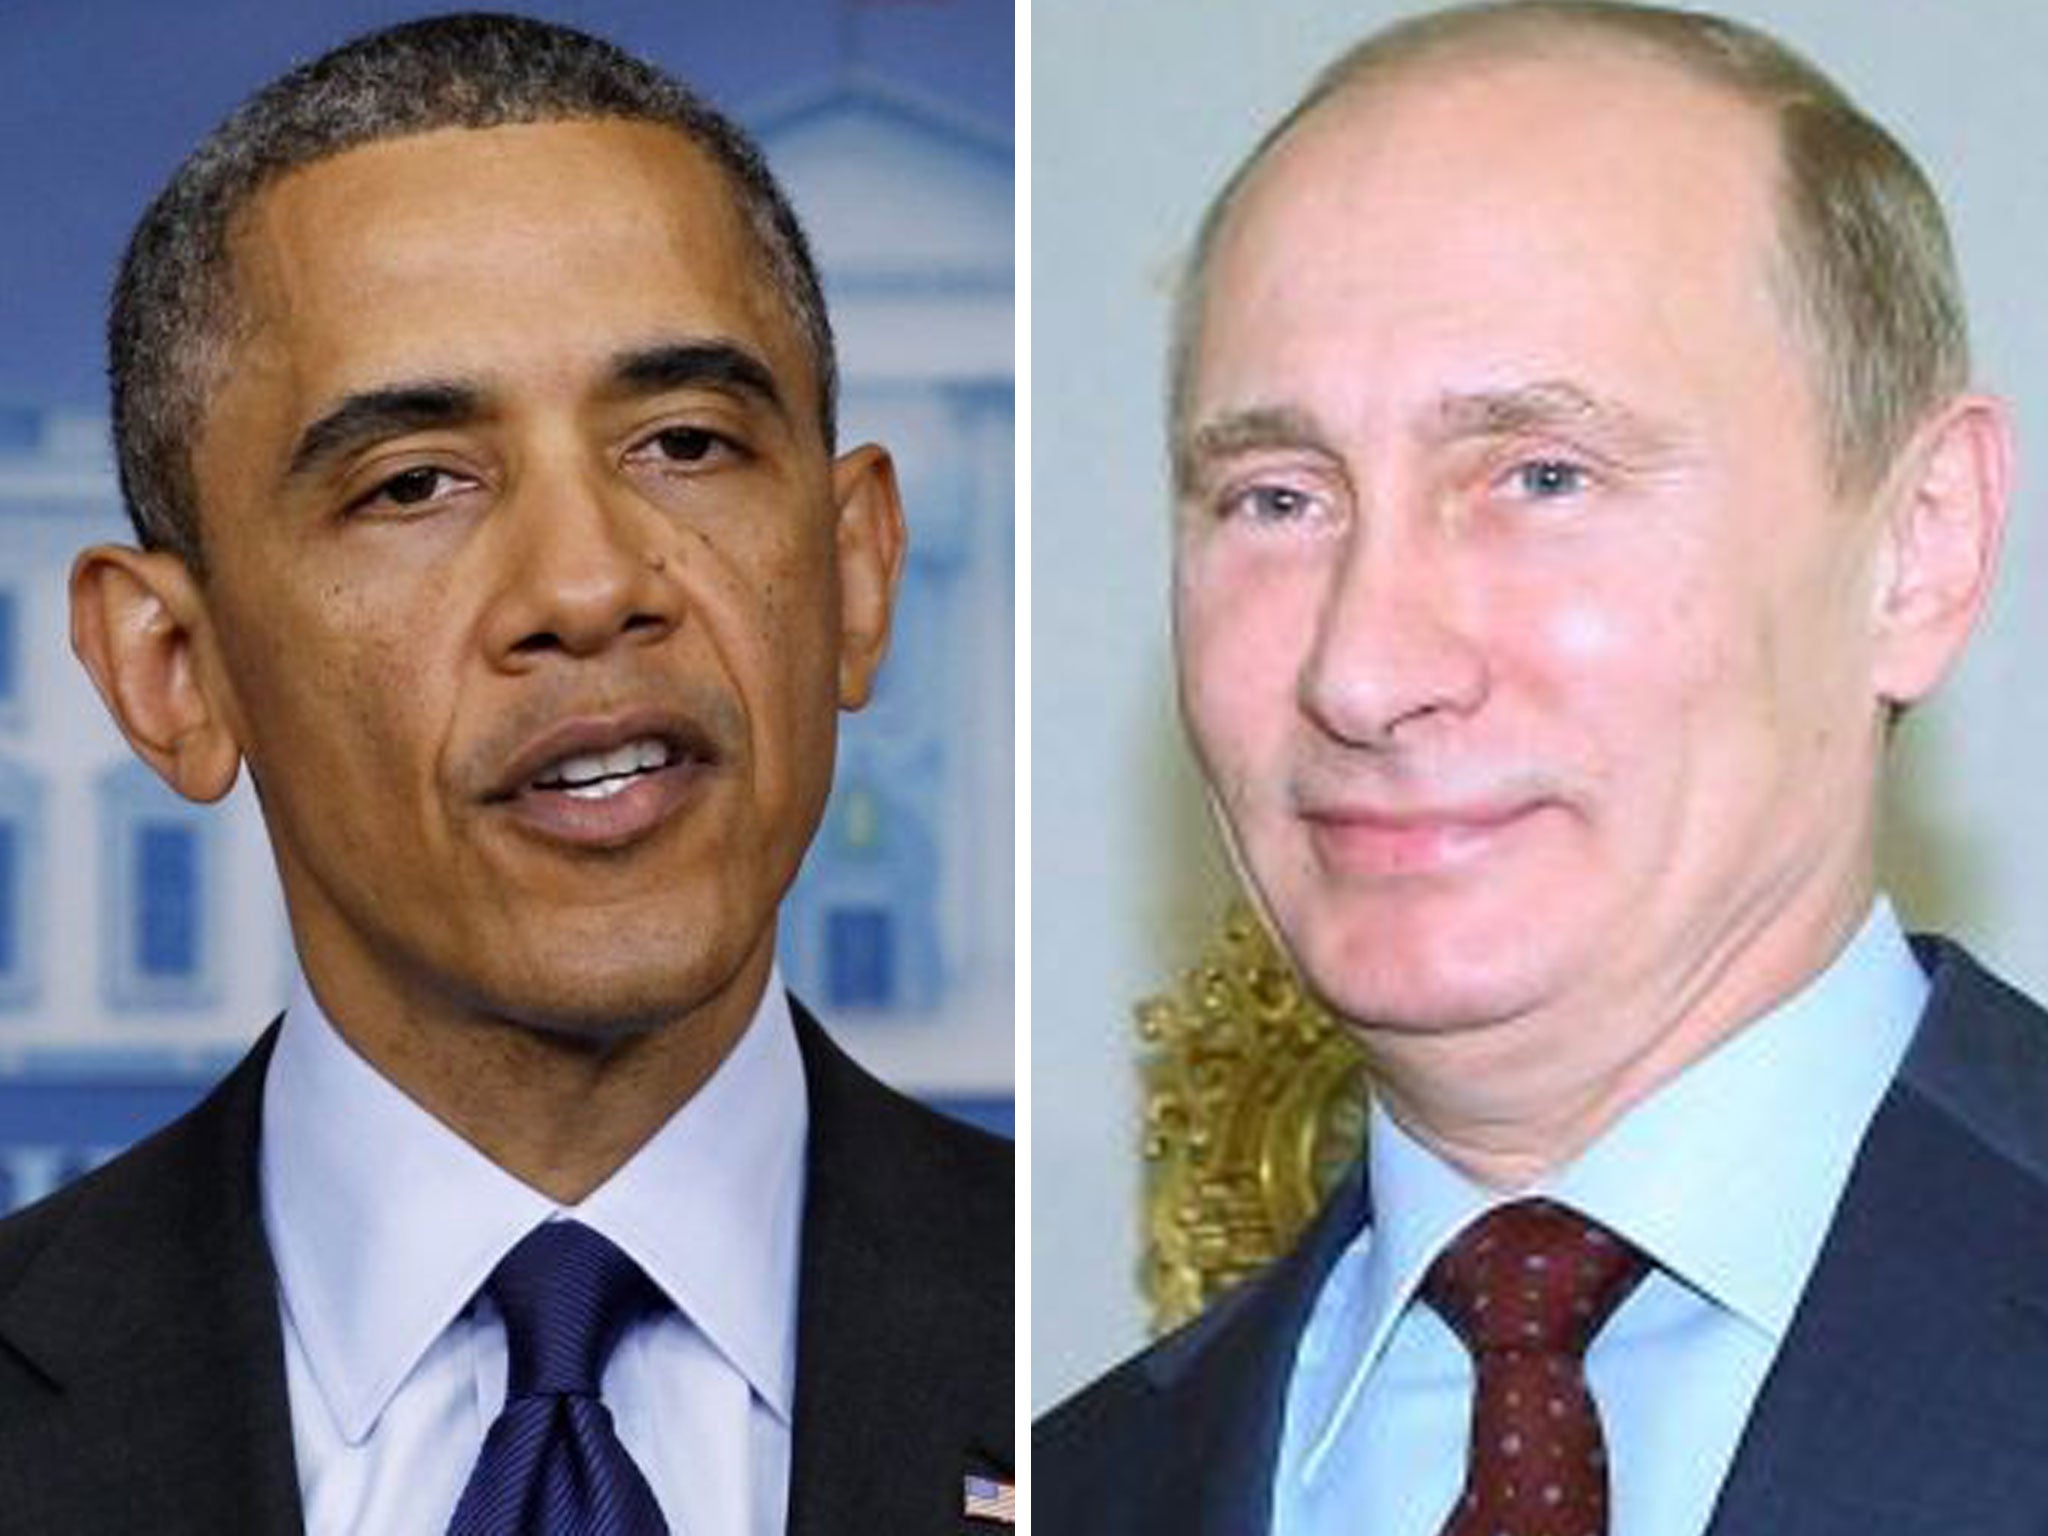 Vladimir Putin and Barack Obama have agreed to increase cooperation on counter-terrorism in the wake of the Boston Marathon bombings, according to the Kremlin